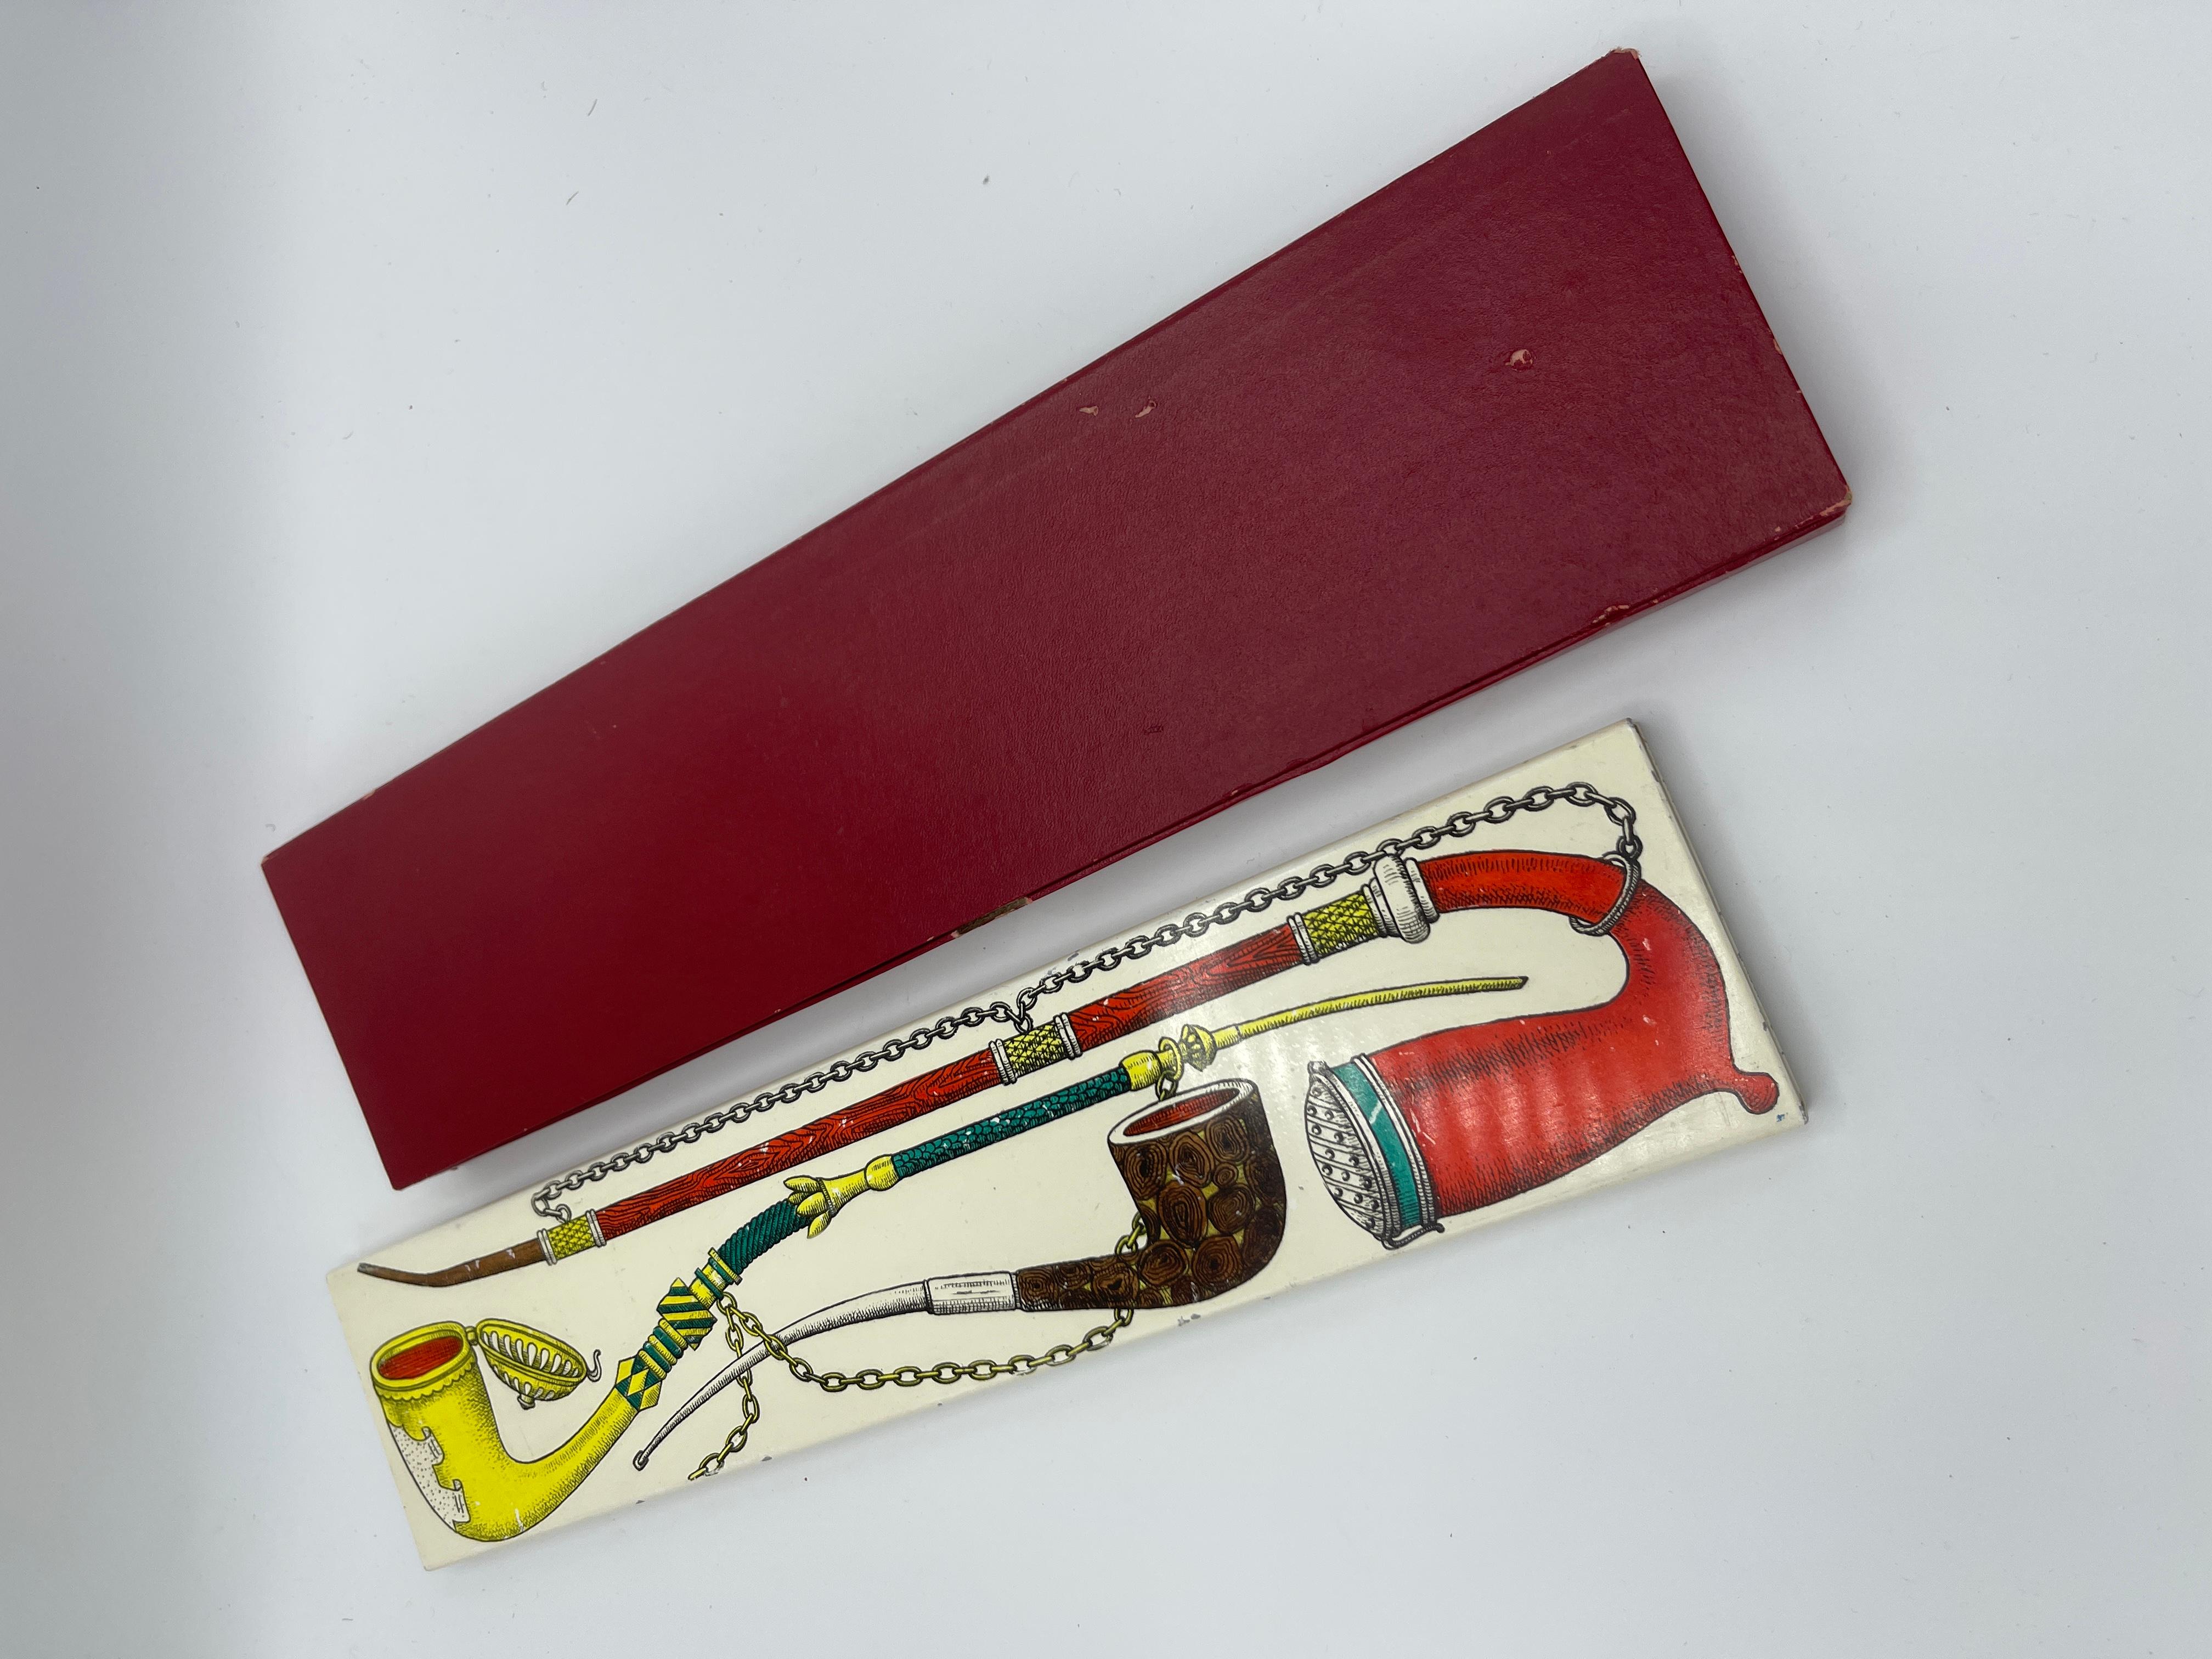 Rare and original metal Boxe by Piero Fornasetti from 50's, decorated with pipes, with the original package. in very good and original condition, used for matches, cigarettes jewelry and more.